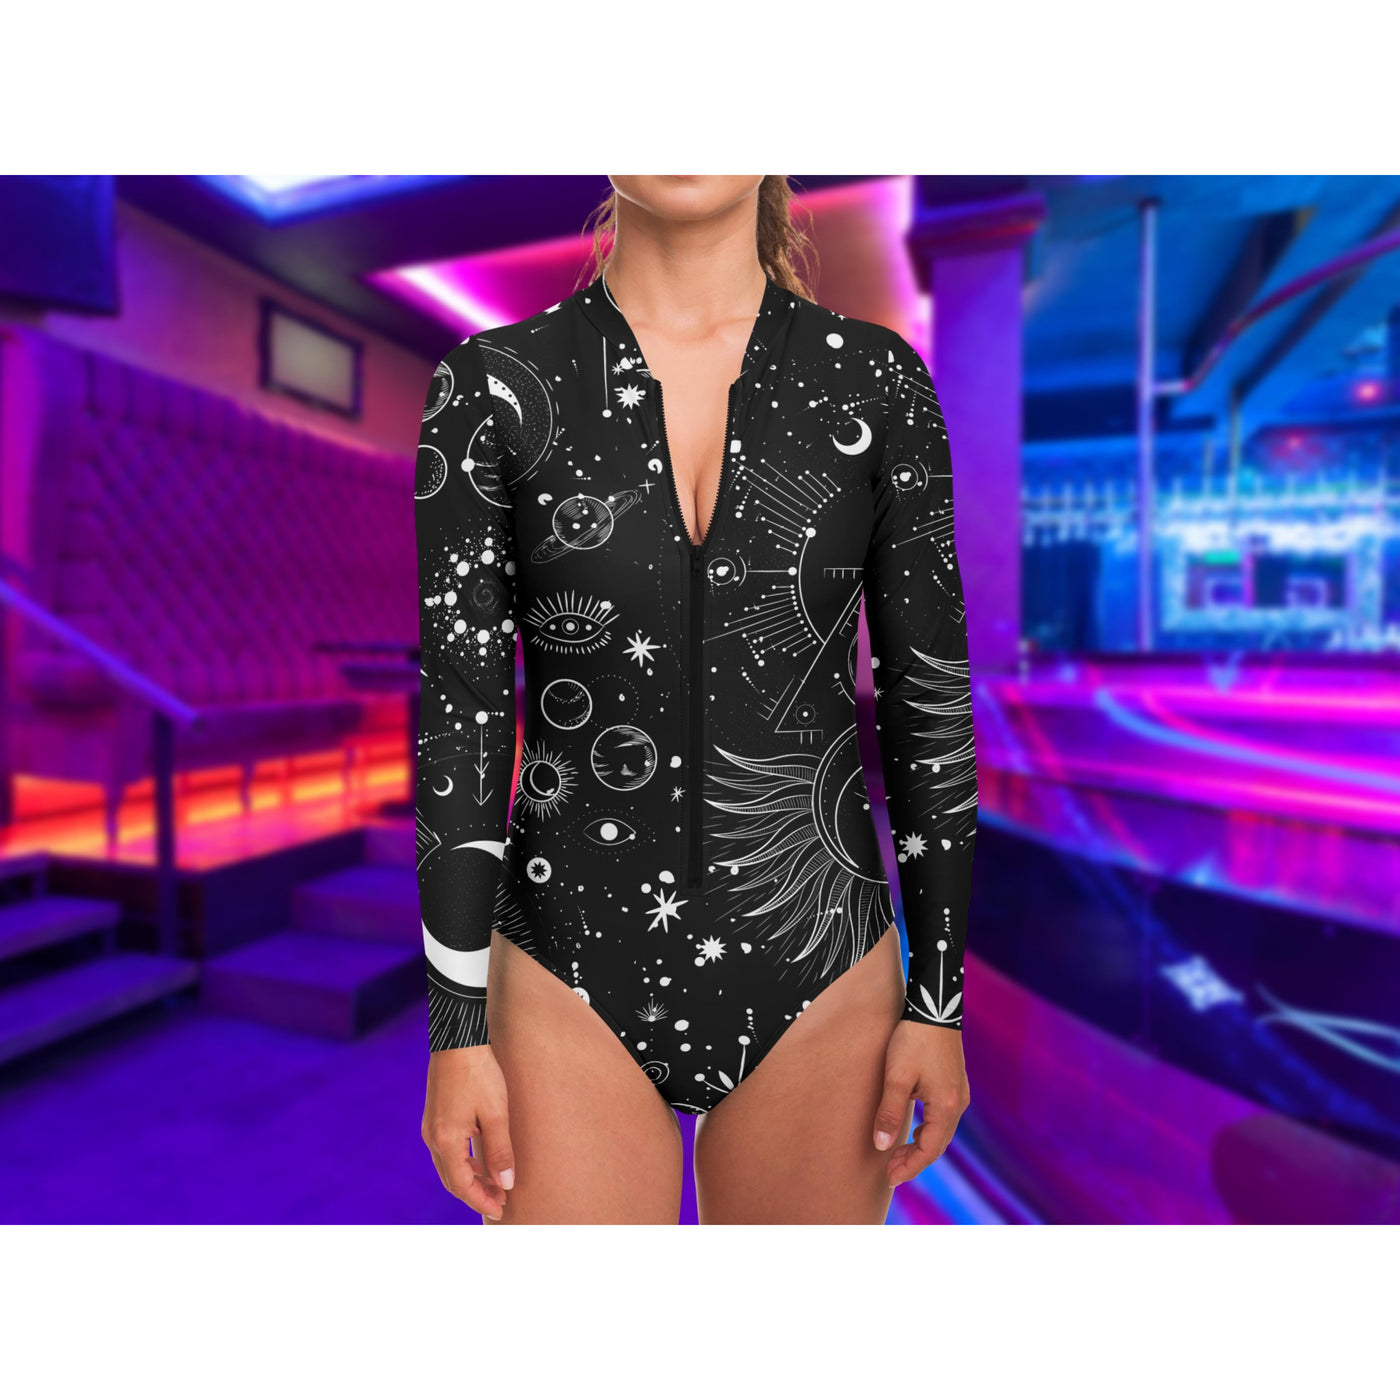 Midnight Blue Celestial Bodies Rave Outfit | Bodysuit Long Sleeve